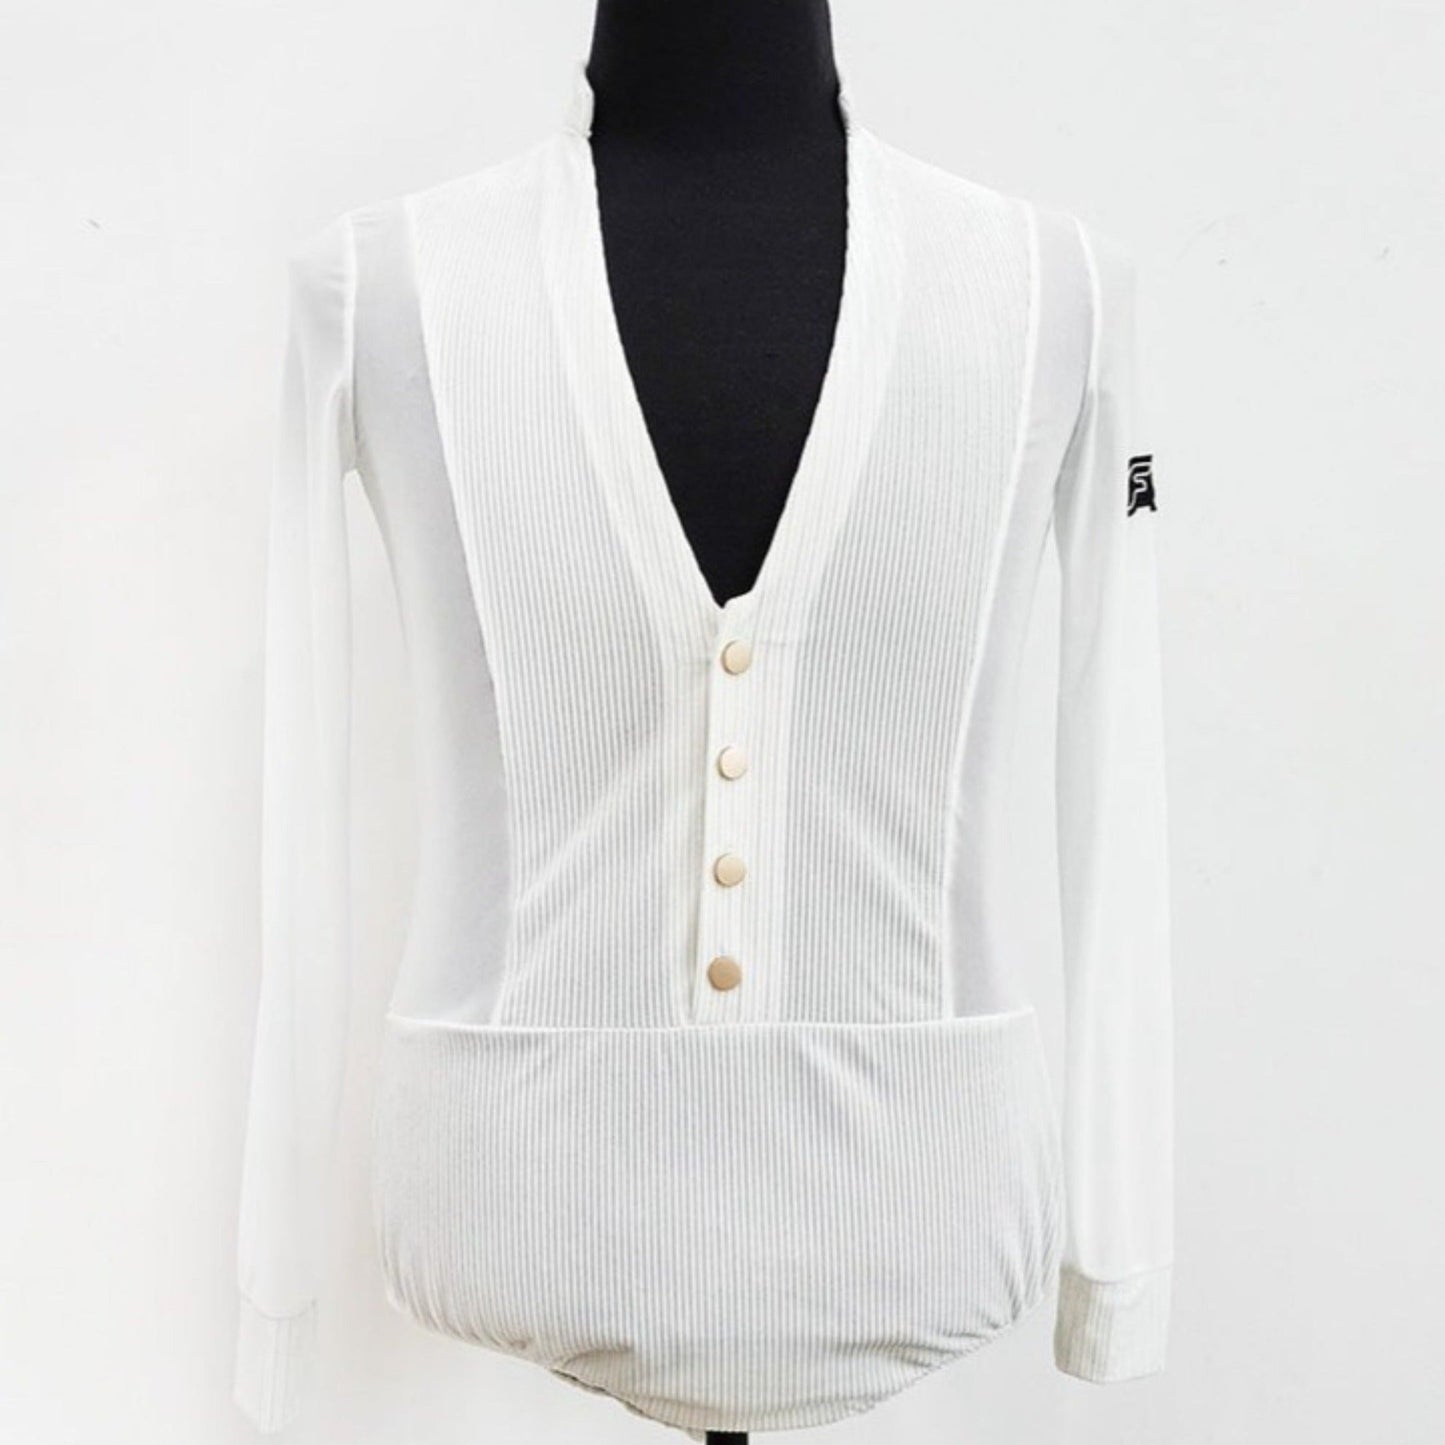 Refined Latin Dance Shirt with Four Buttons | White / Black | BY349